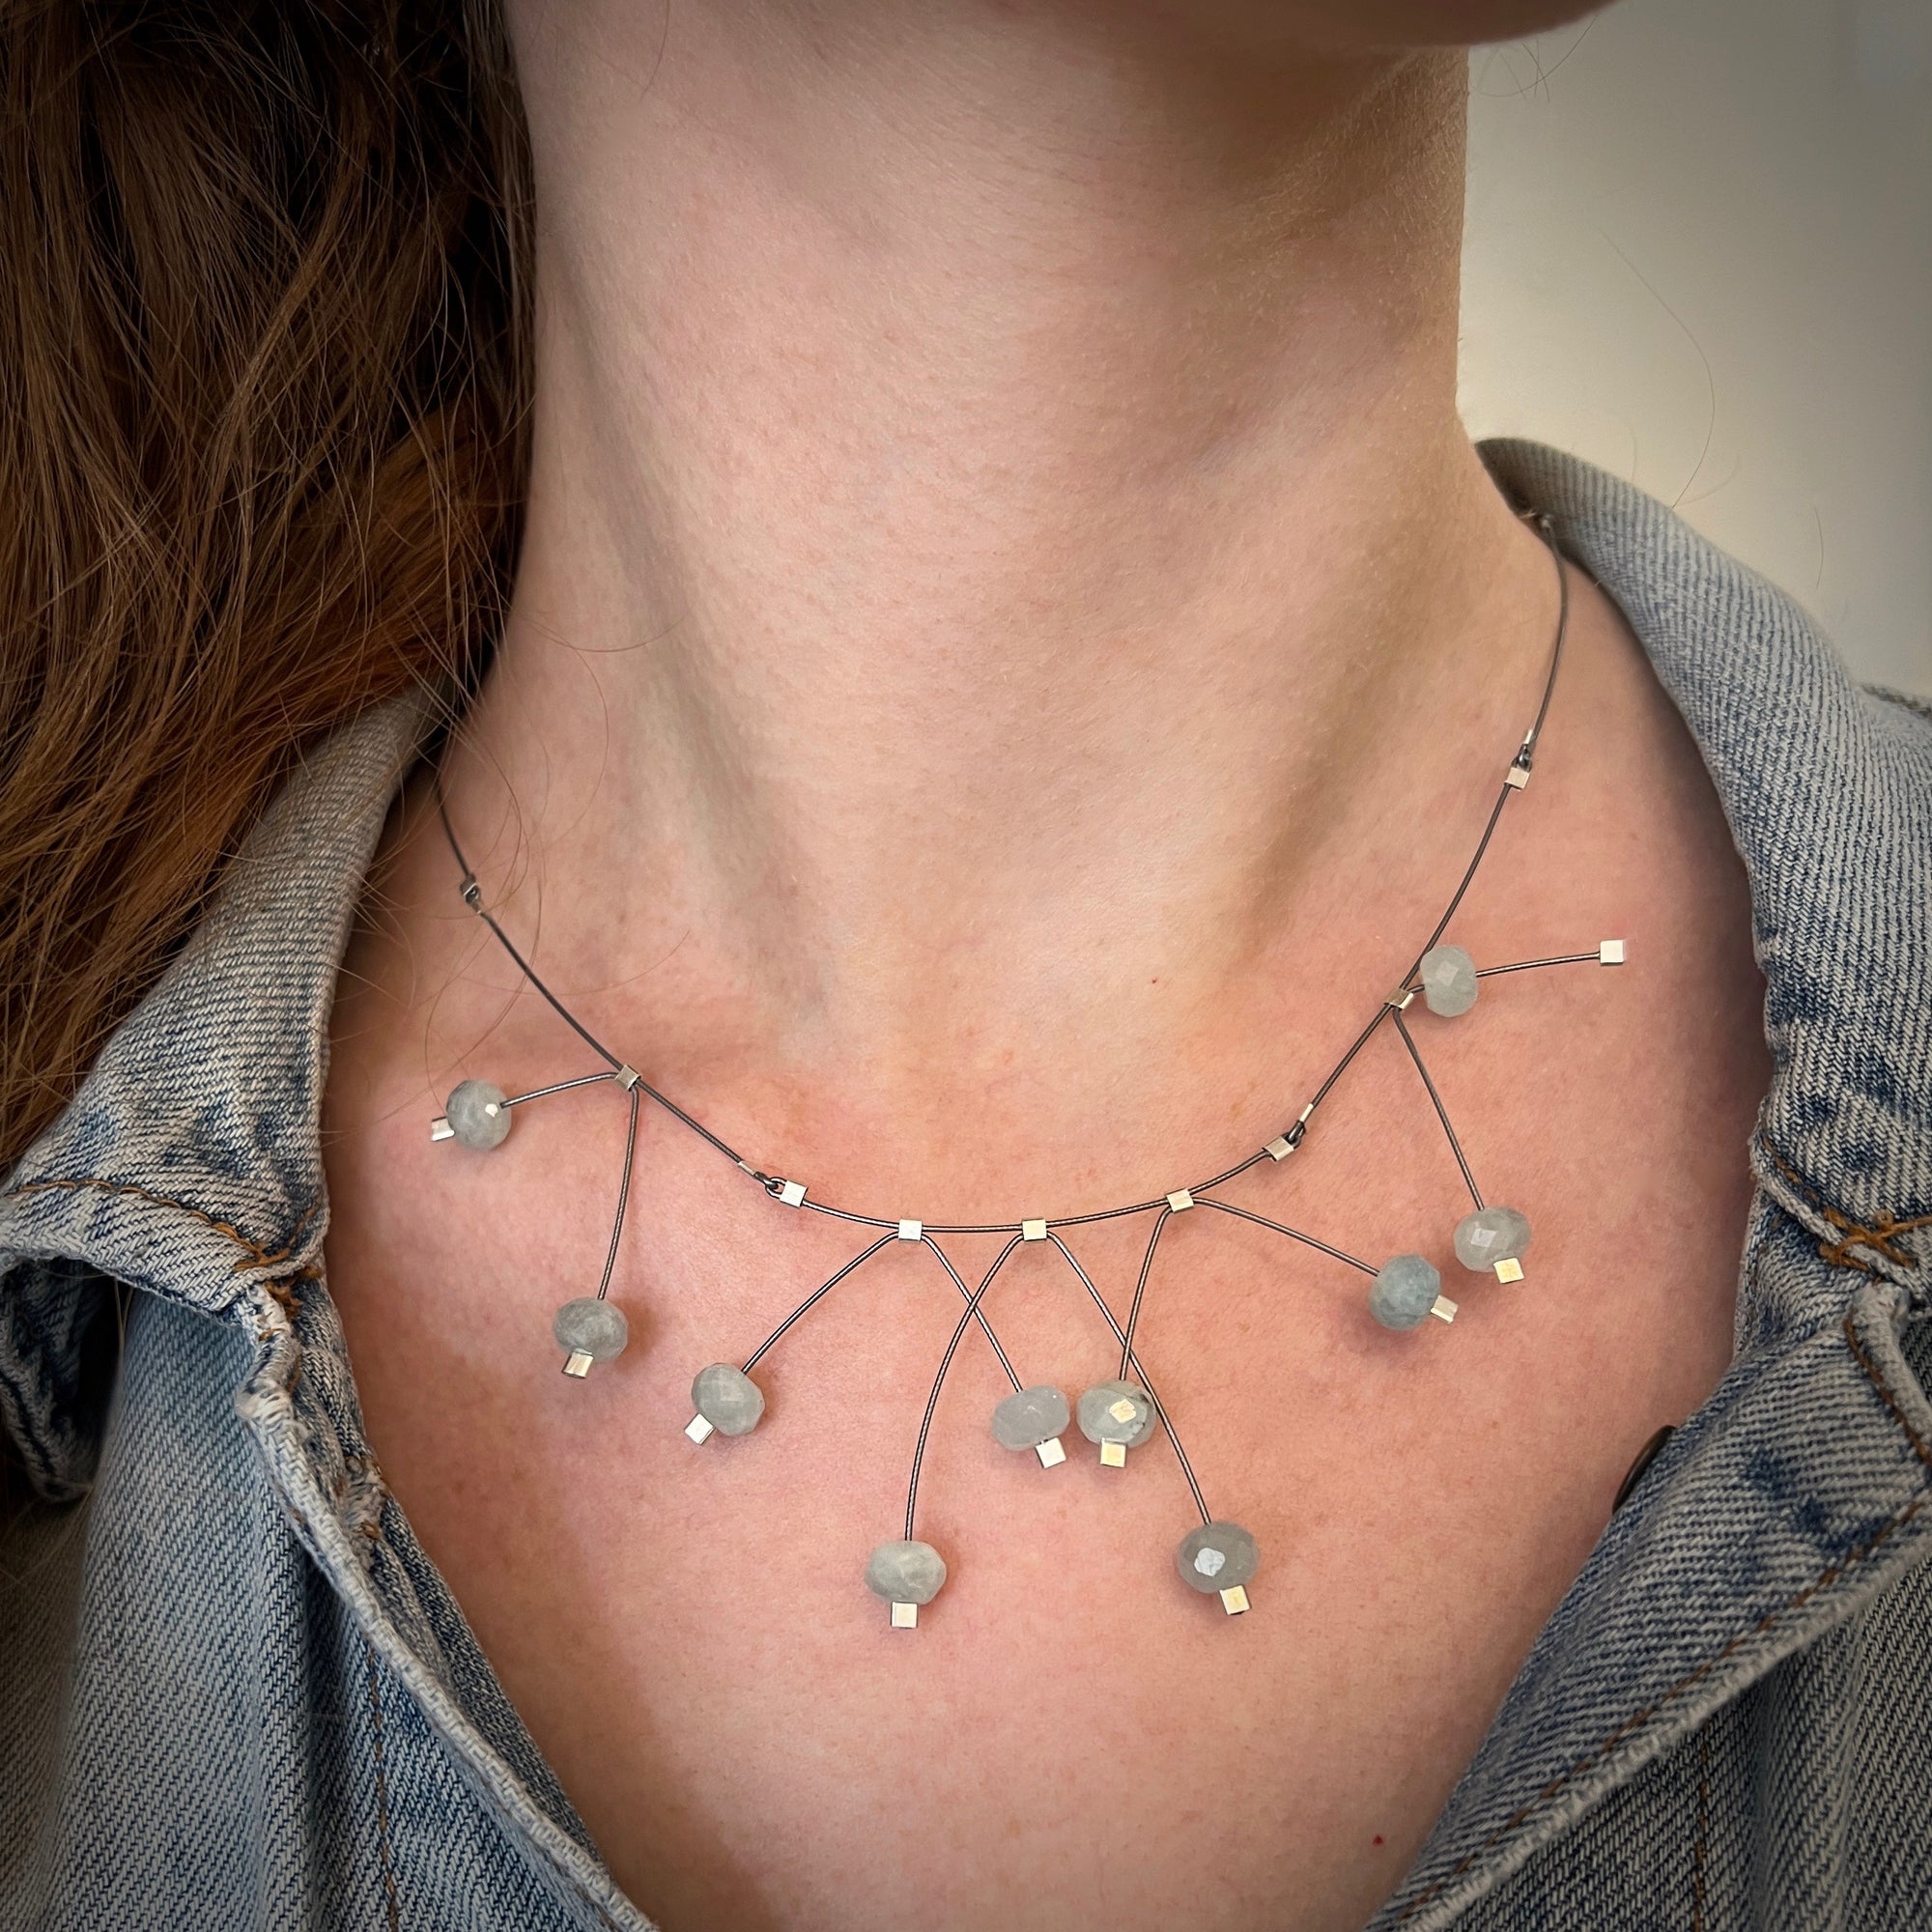 Aquamarine beads intersect each other on a gunmetal cable, 14K gold filled hardware, 16" by artist Meghan Patrice Riley